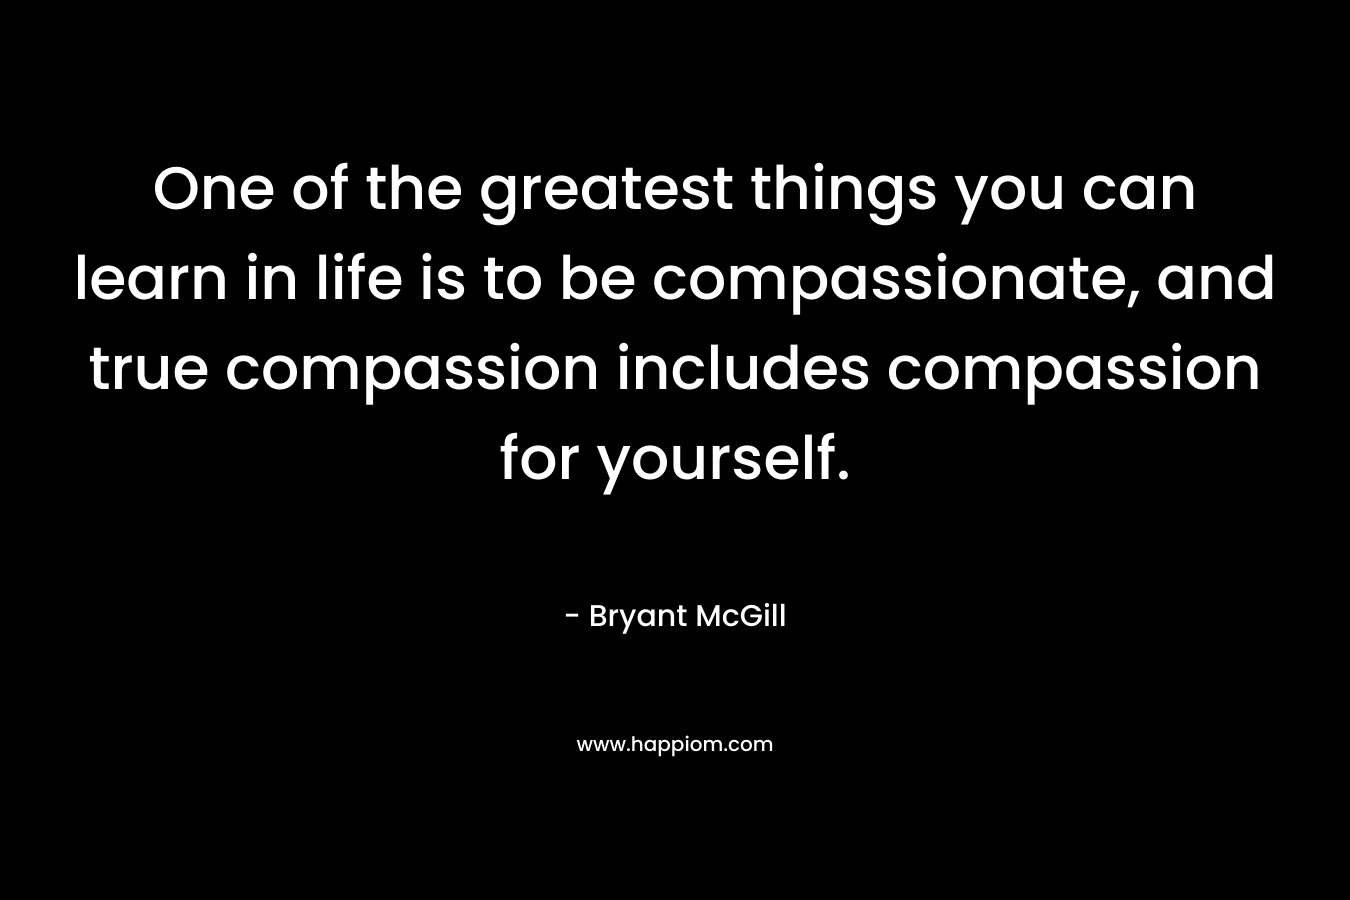 One of the greatest things you can learn in life is to be compassionate, and true compassion includes compassion for yourself.